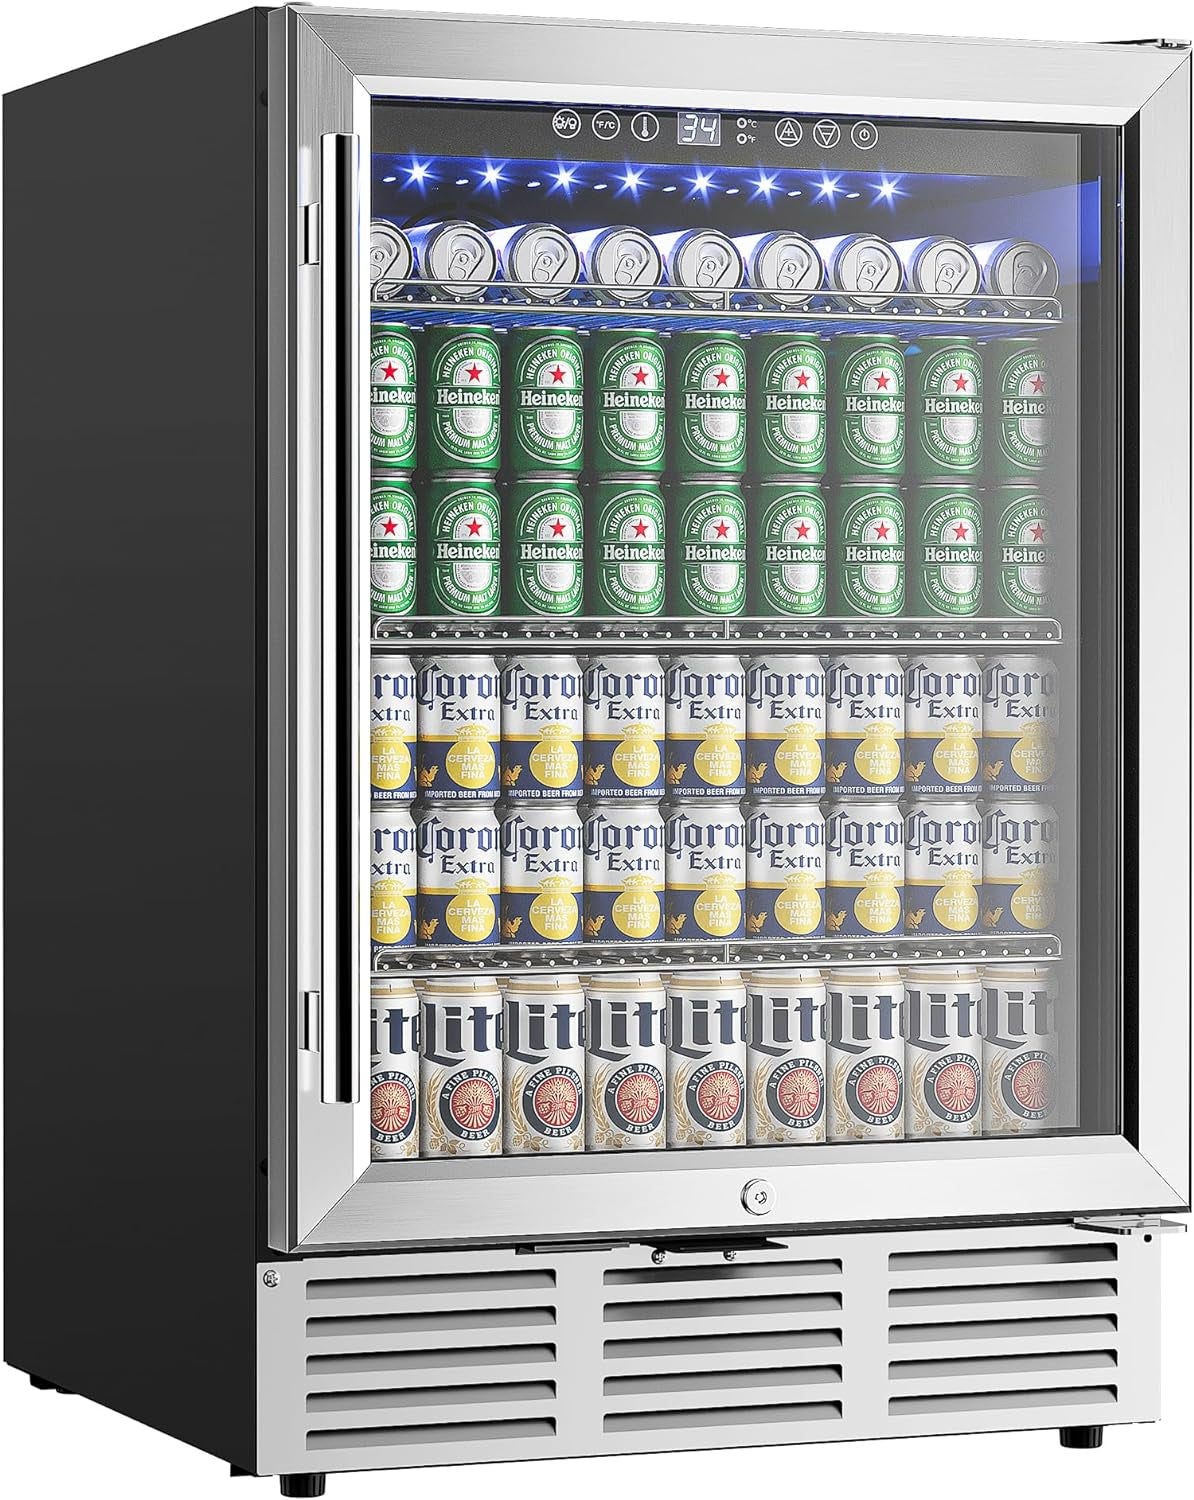 Offer For 24 Inch Beverage Refrigerator, 180 Can Built-In or Freestanding Beverage Cooler, under Counter Beer Fridge with Glass Door for Soda, Water, Wine - for Kitchen, Bar or Office. MowerShop